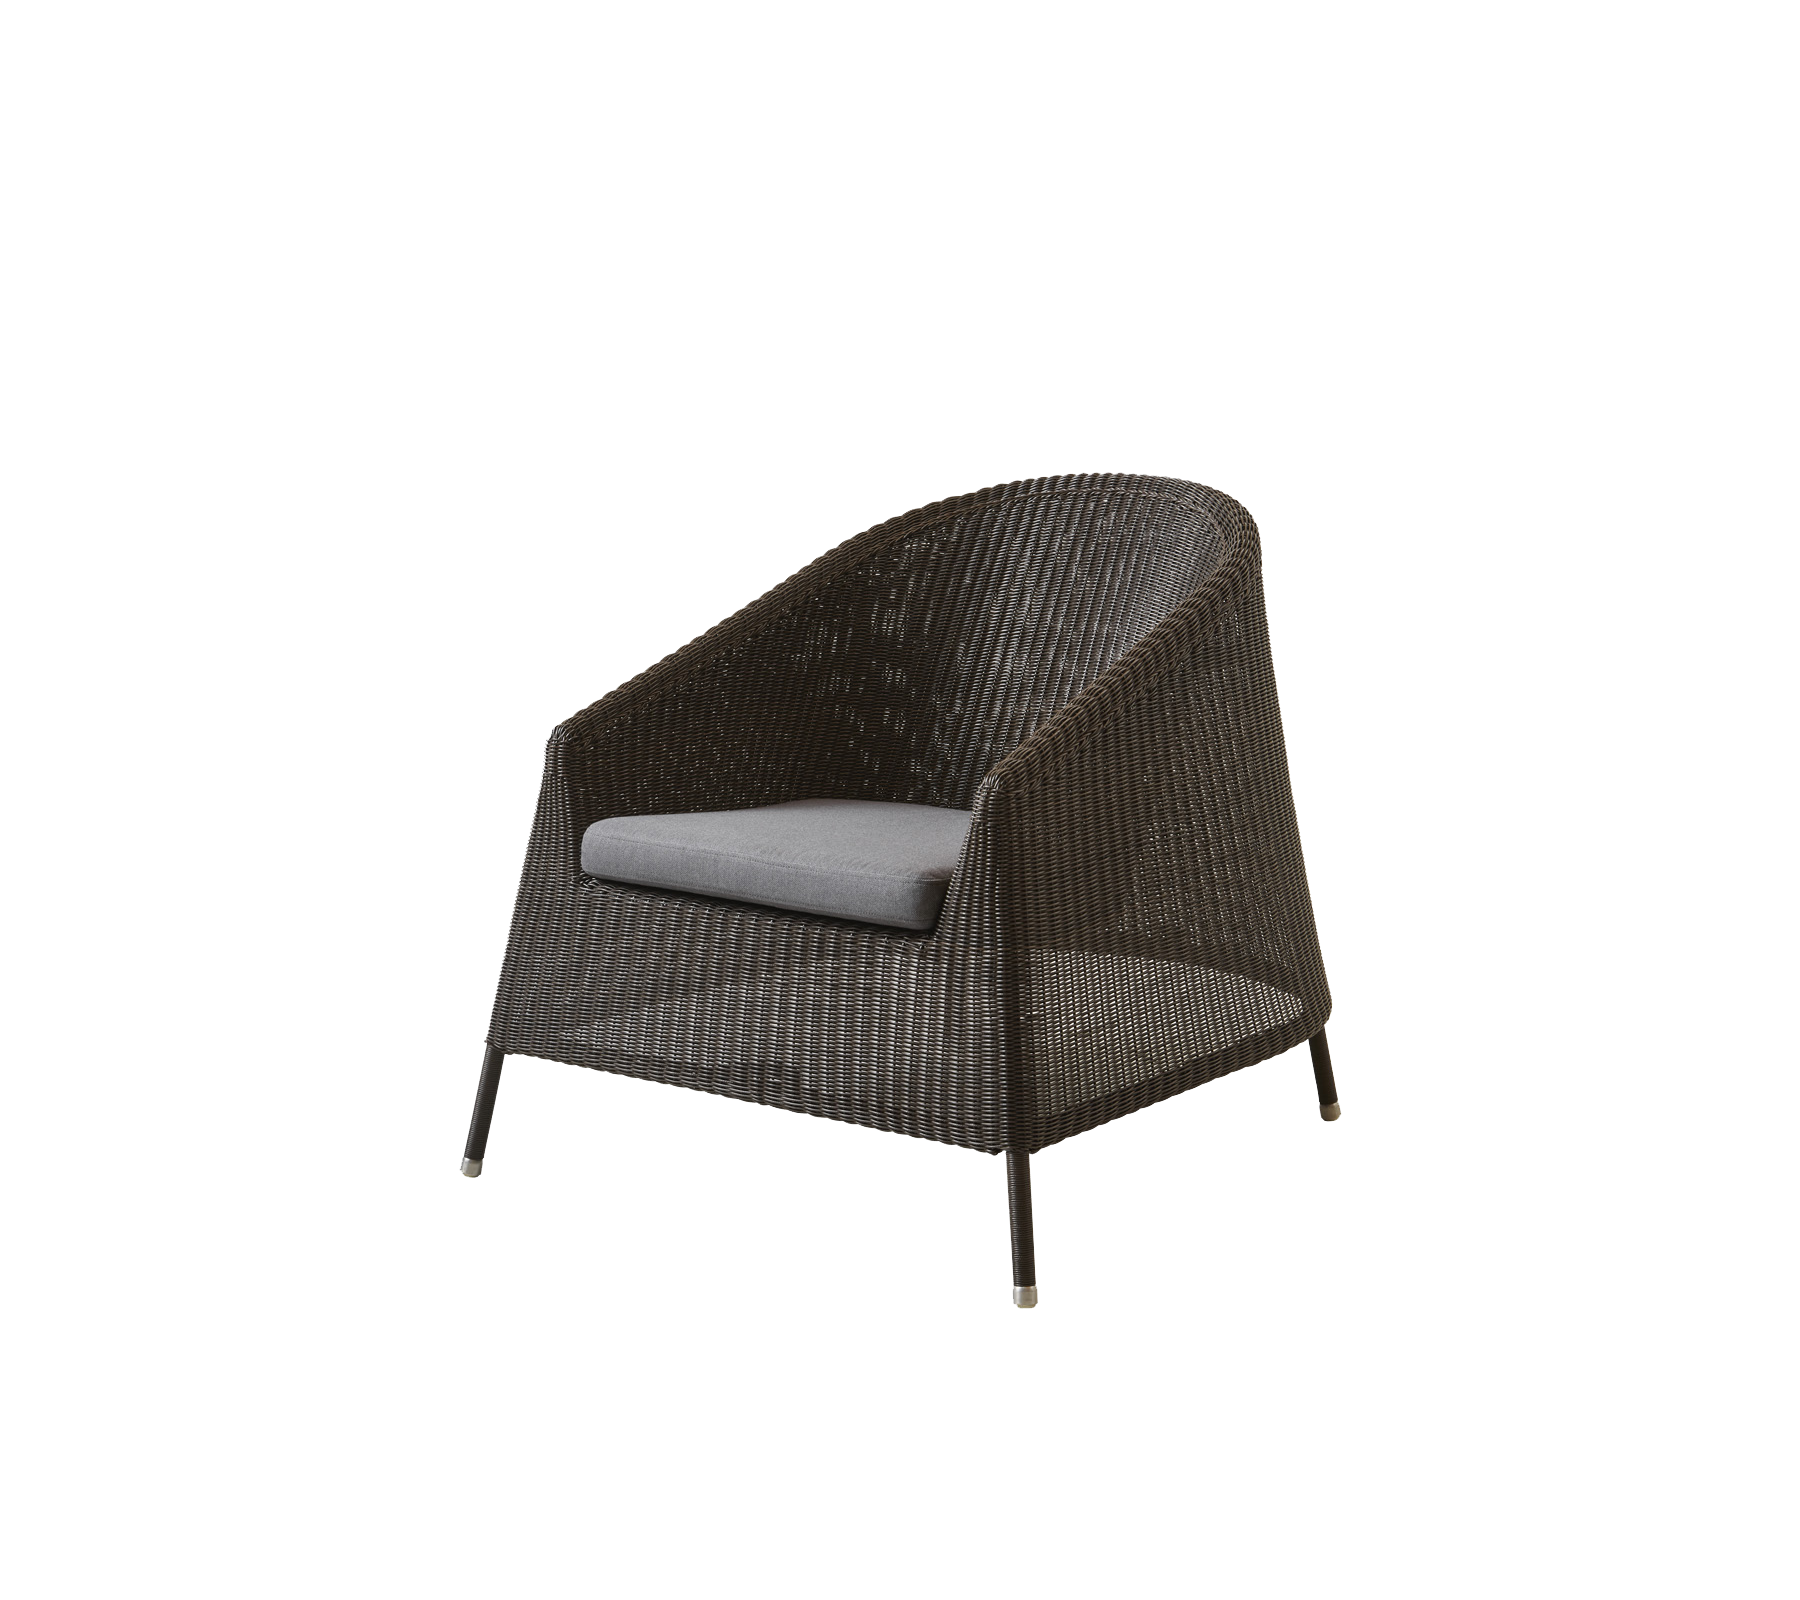 Kingston fauteuil coussin assise